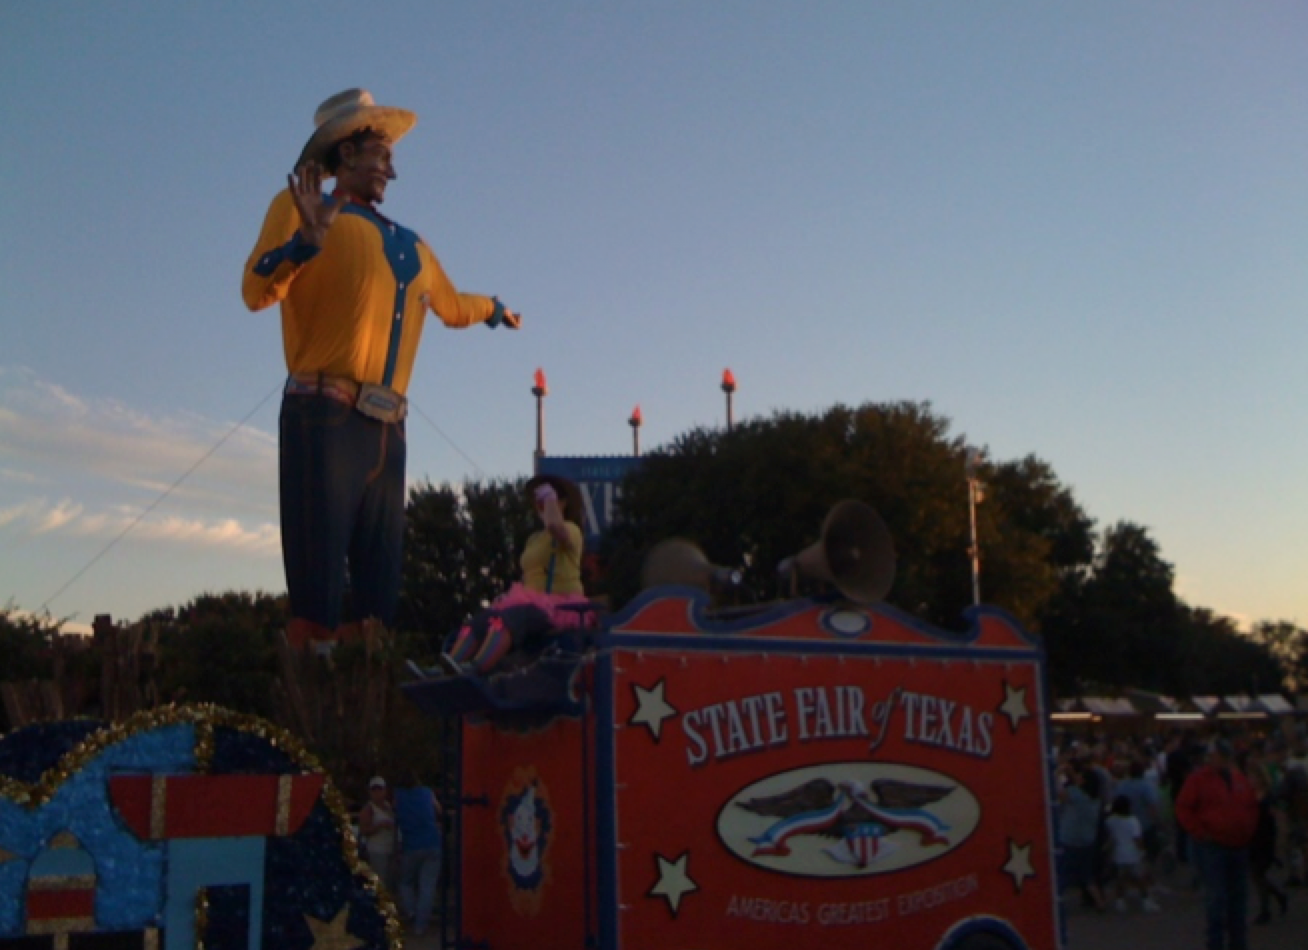 Amazon HQ2 employees will love Big Tex at the State Fair